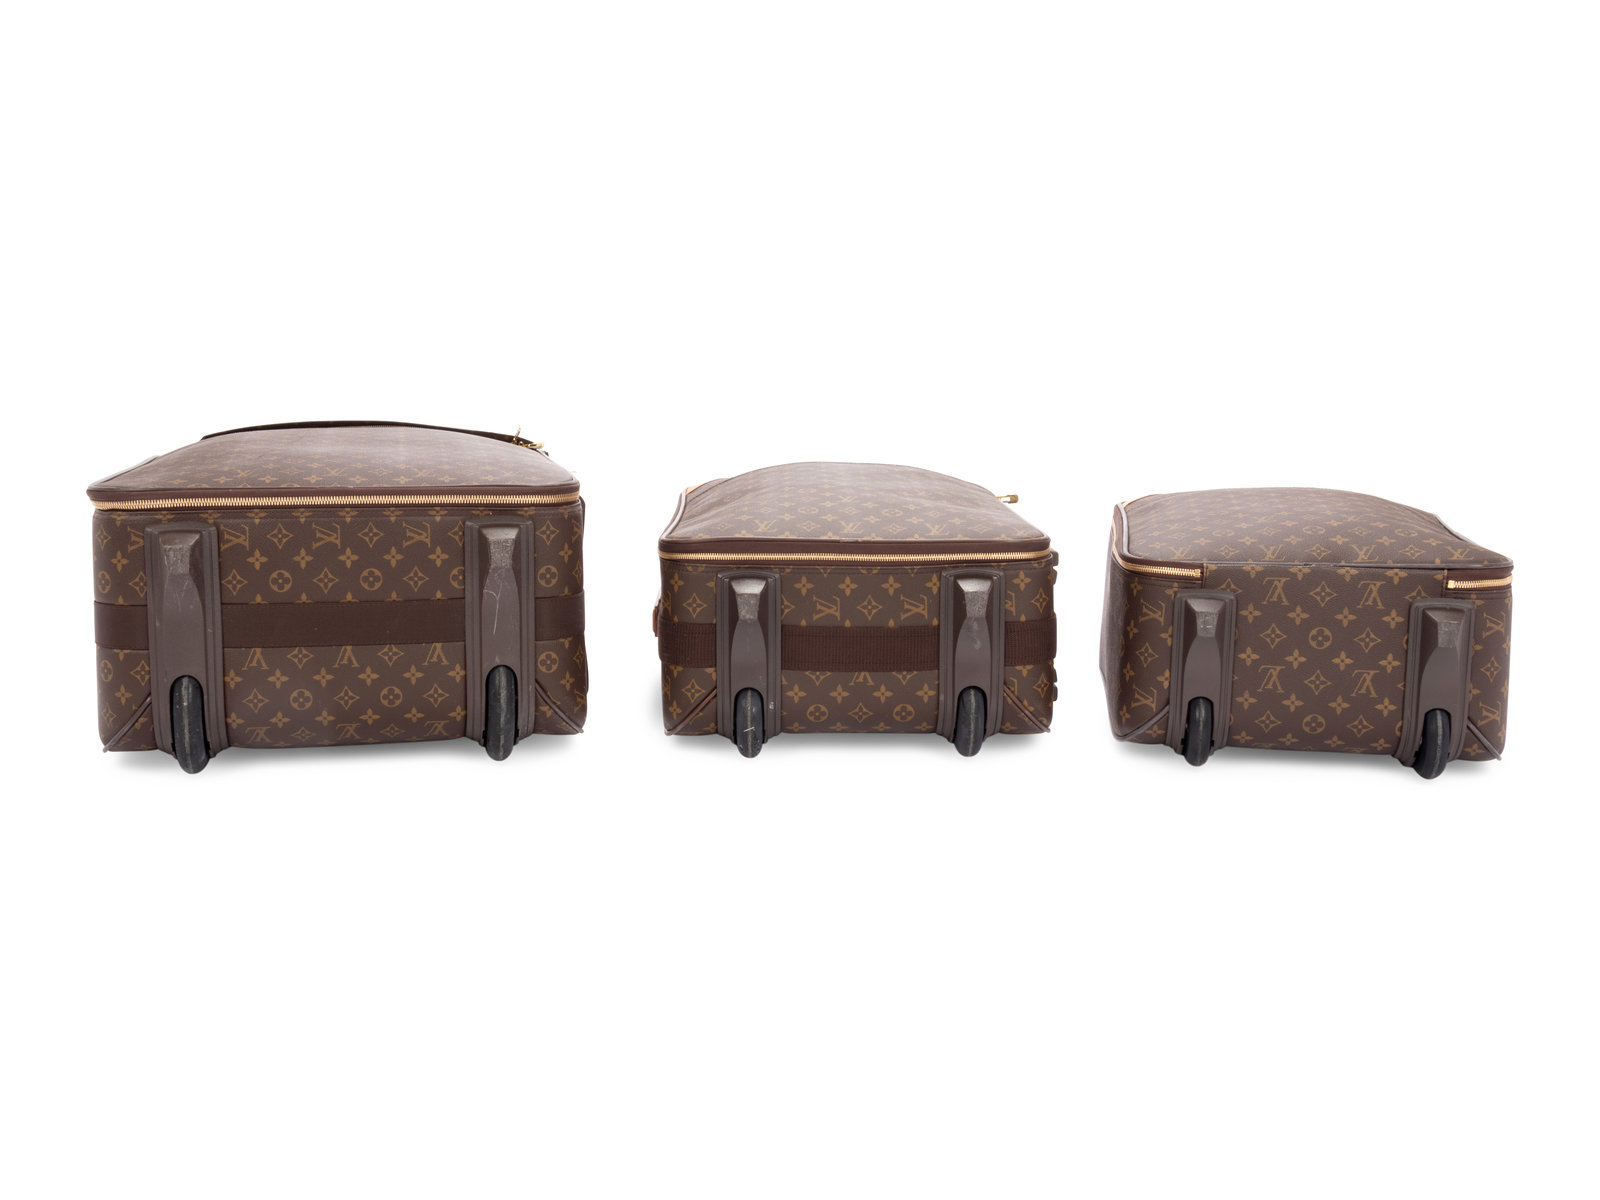 Louis Vuitton Monogram Rolling Luggage – QUEEN MAY